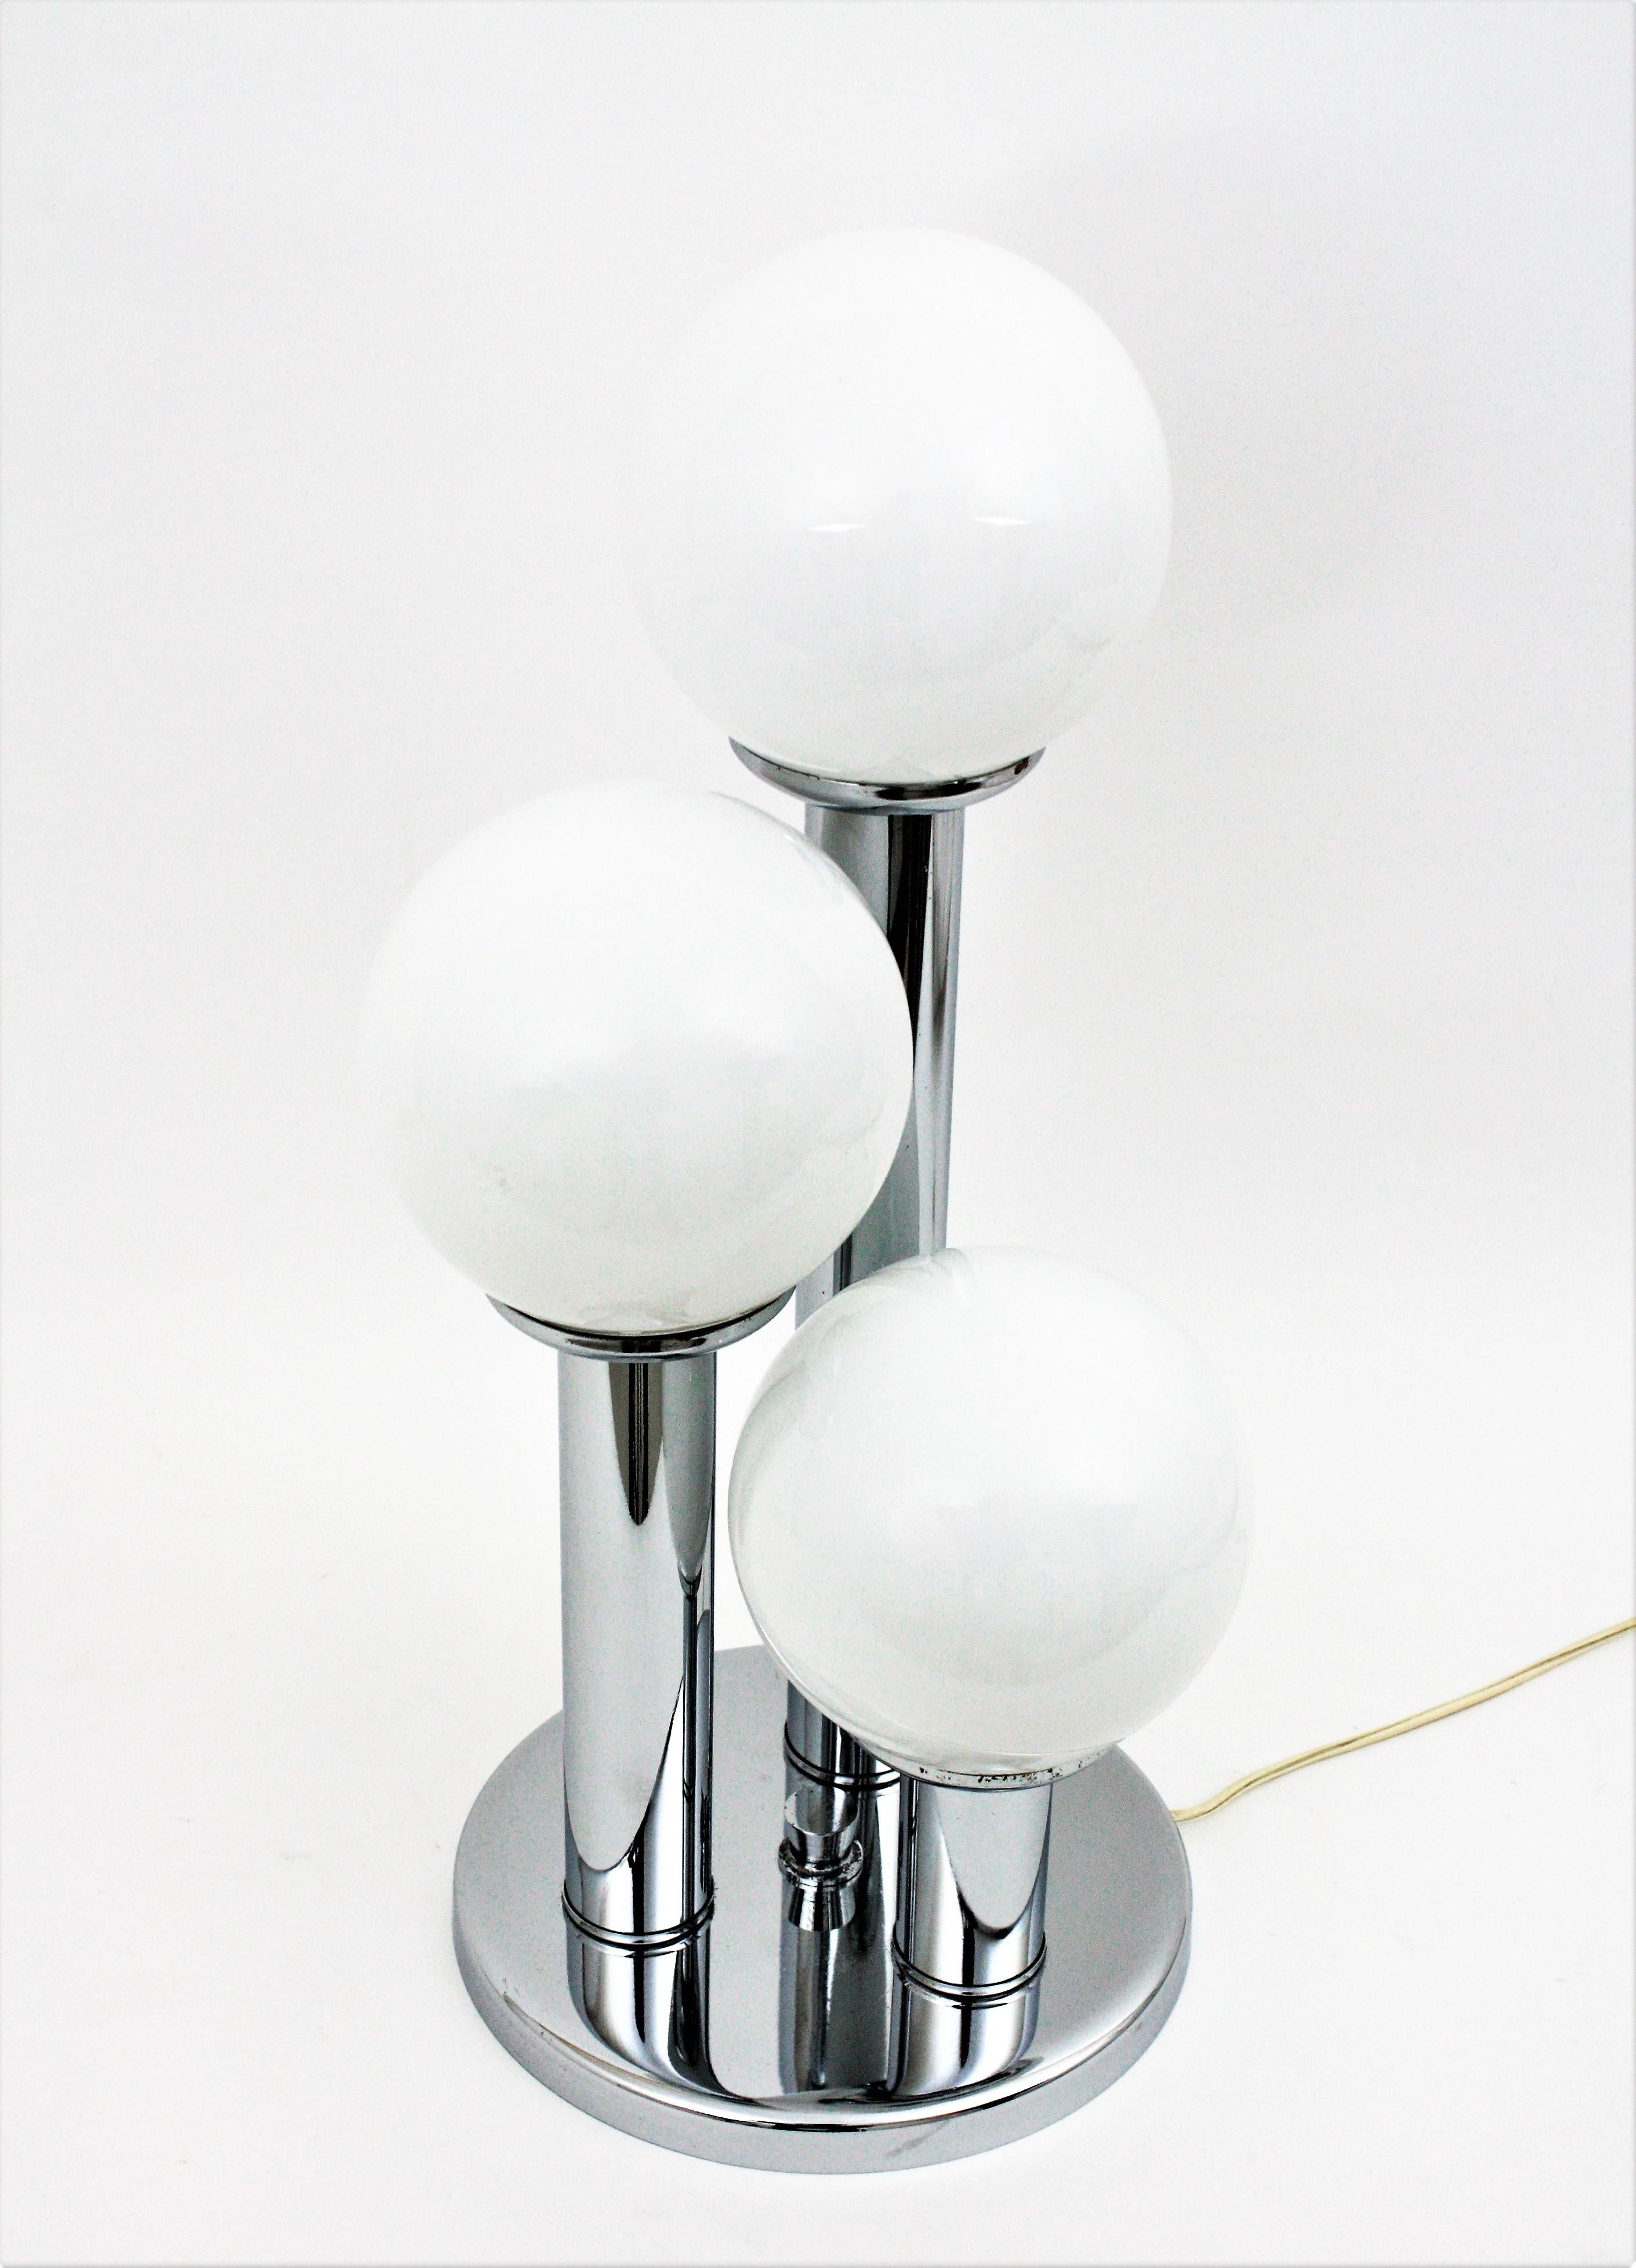 A beautiful table lamp with three chrome columns in different heights holding opaline glass globes. Italy, 1960s
It has three chromed steel columns holding 3 glass globe light in different heights and standing up on a round base.
Beautifully